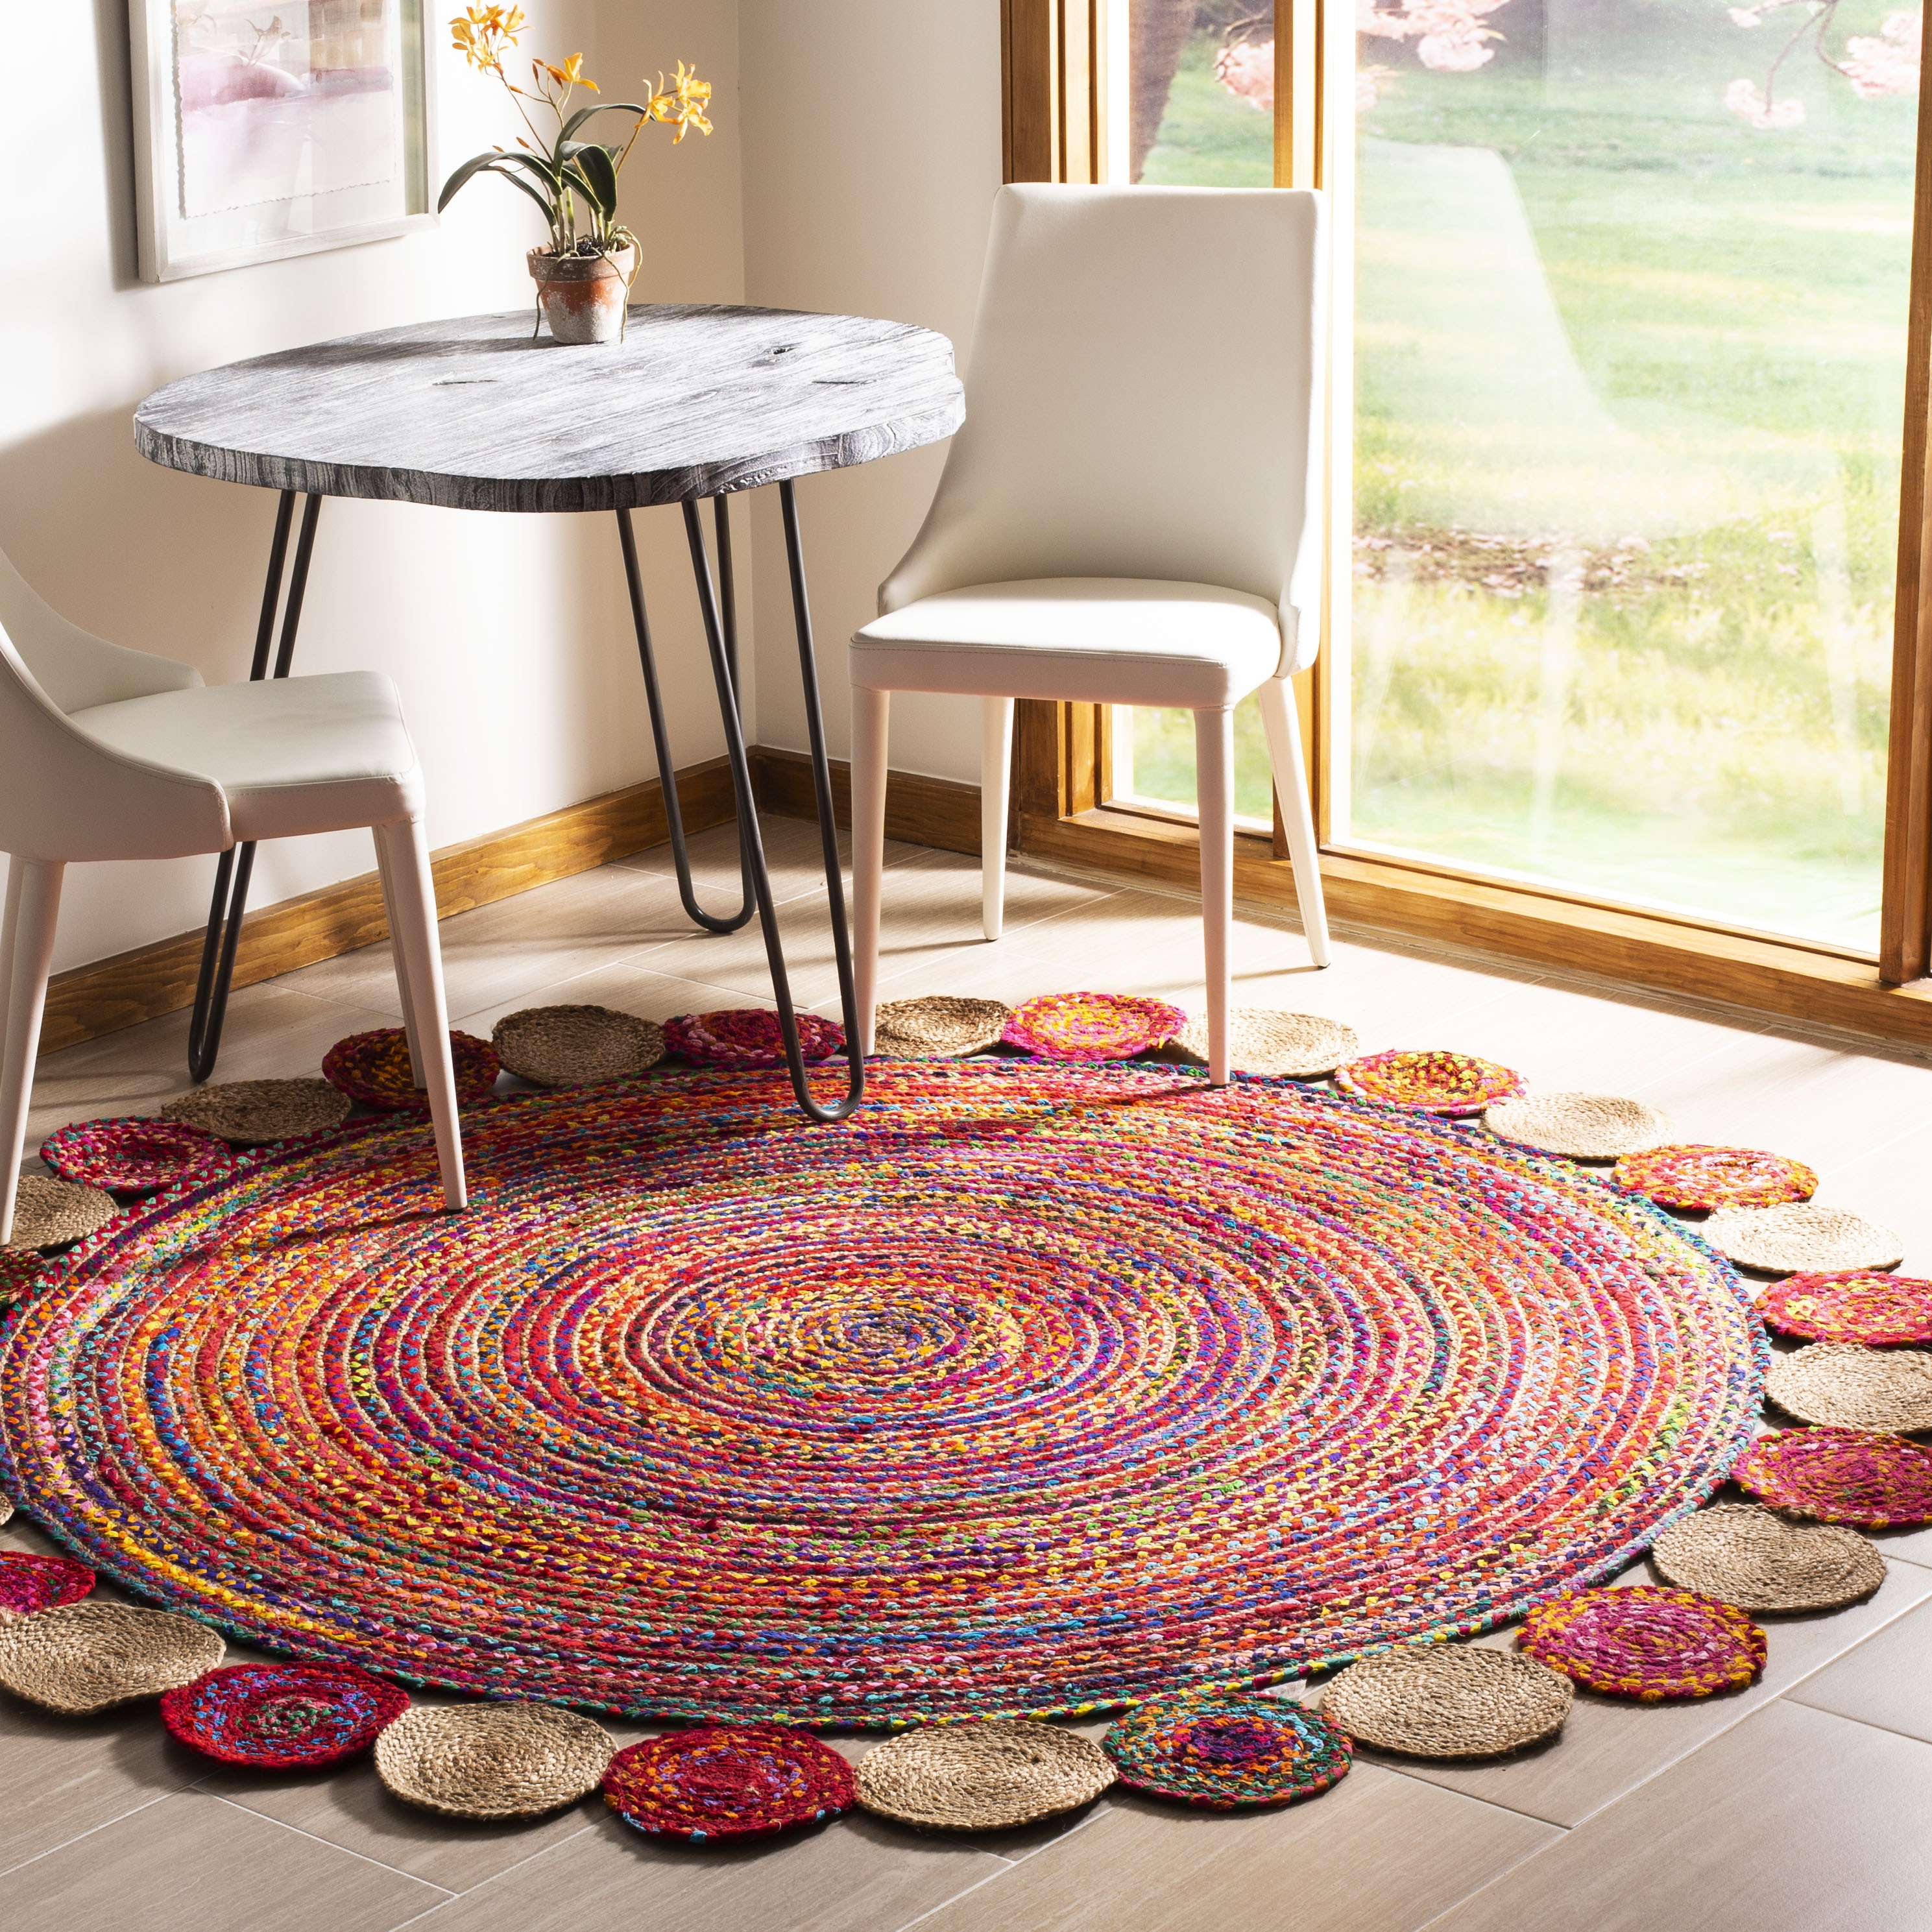 Arlo Home Hand Woven Area Rug, CAP201A, Red/Multi,  8' X 8' Round - Image 1